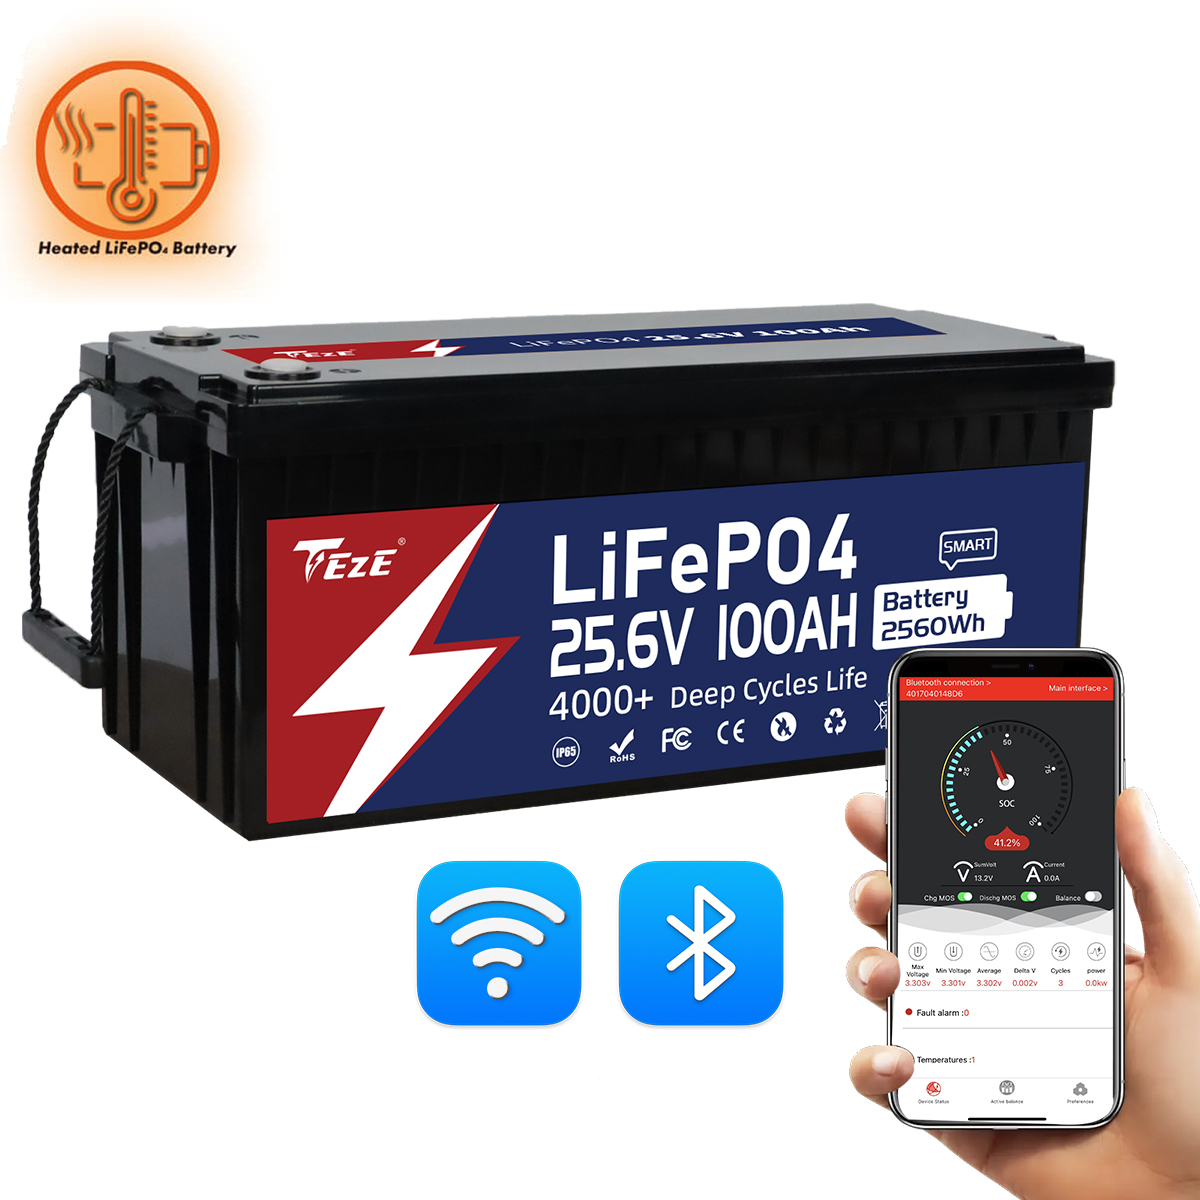 New Add WiFi-TezePower 24V 100Ah LiFePO4 Battery with WIFI and Bluetooth, Self-heating and Active Balancer, Built-in 100A Daly BMS(WIFI Built-in Version)